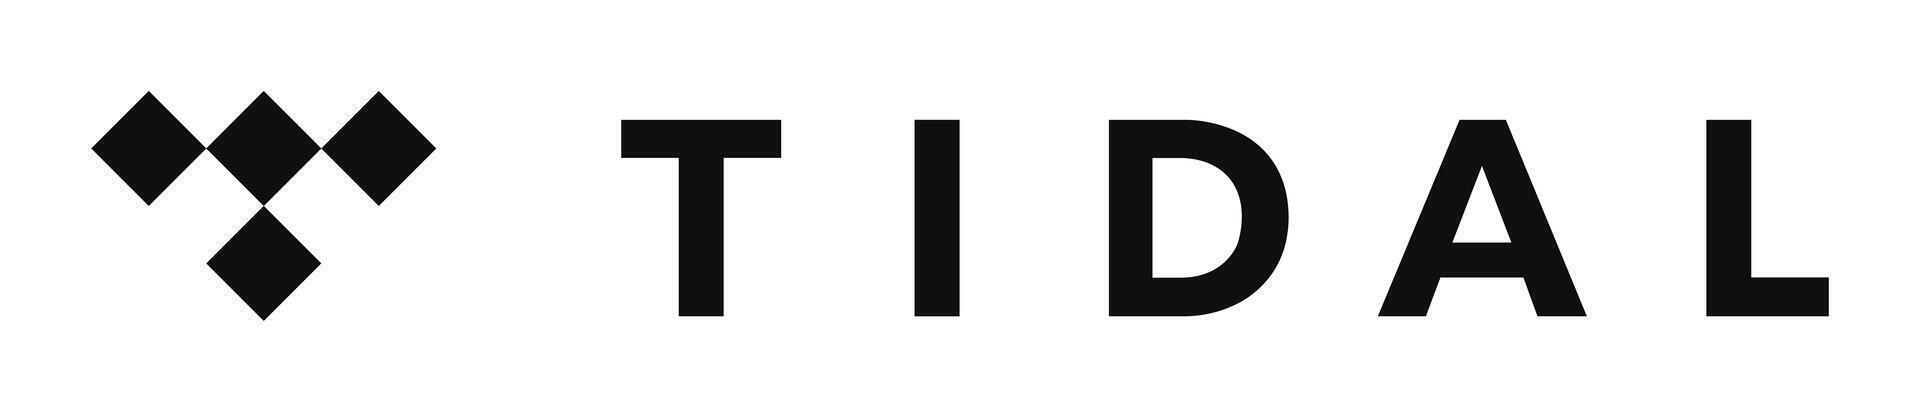 Tidal logotype. Online subscription service for music, podcasts and video streaming vector